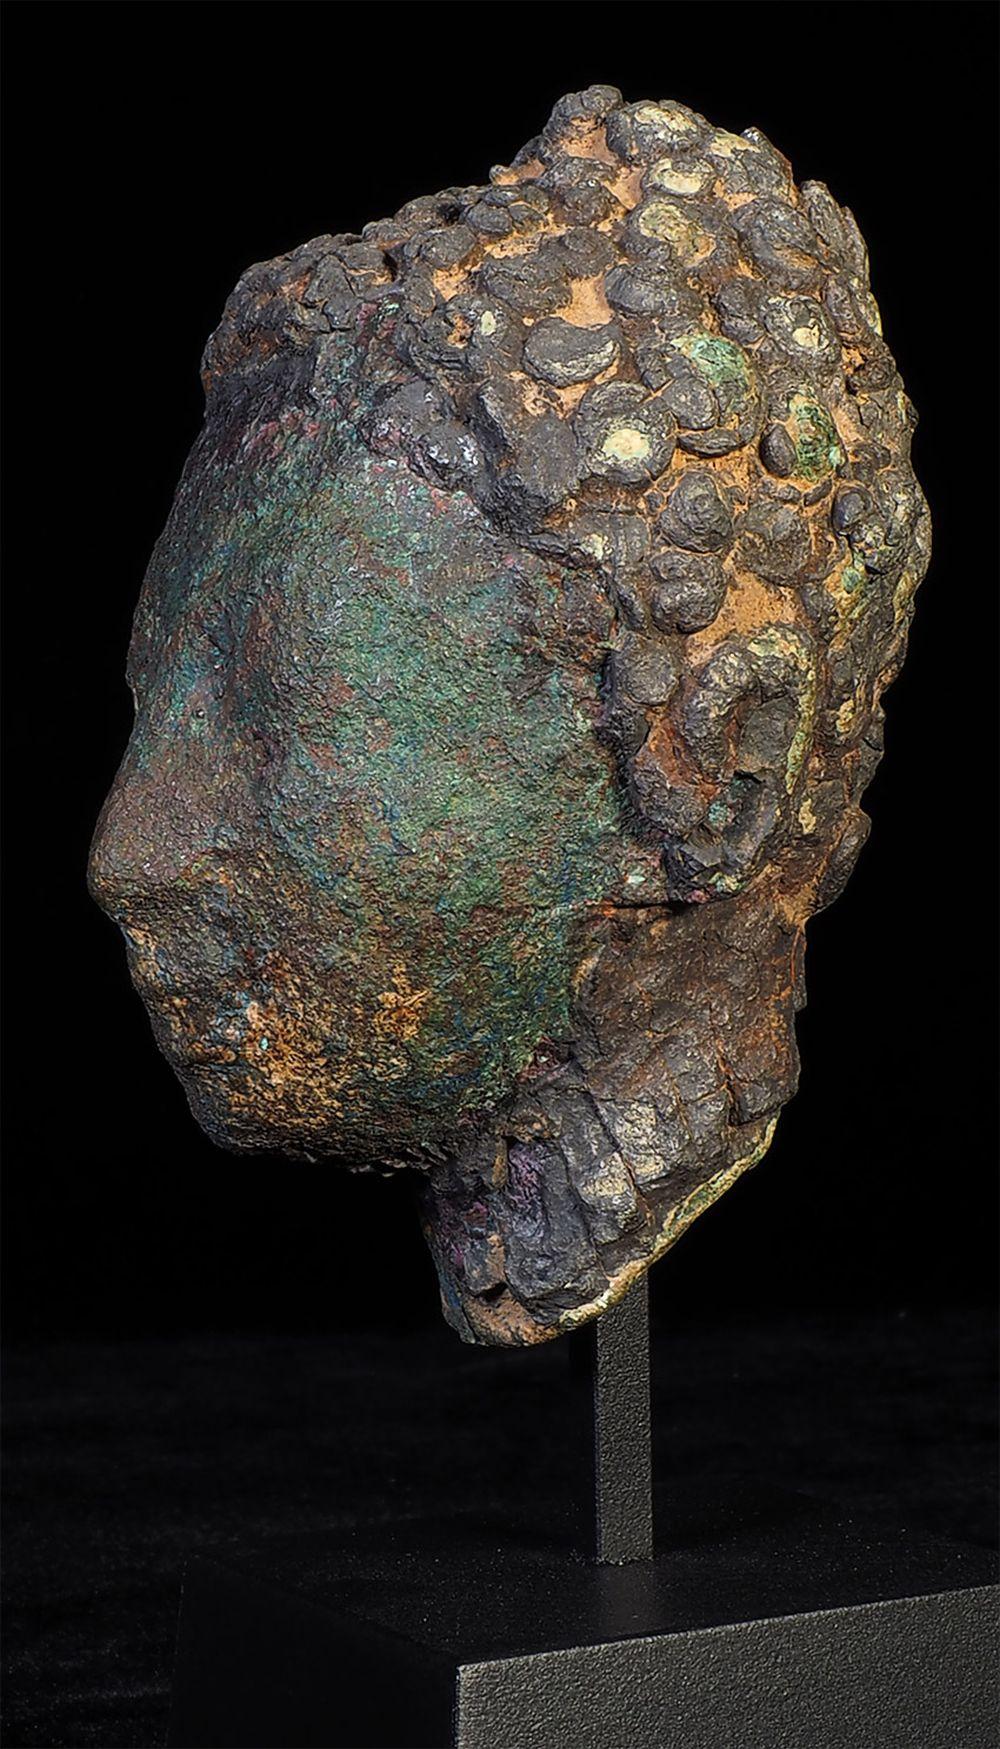 Very early Thai bronze Buddha head from the 9th/10thC. It has a sensitivity and finesse not often found in such early SE Asian sculptures. It is very large for a bronze head from this early period and quite heavy. The Buddha was probably standing